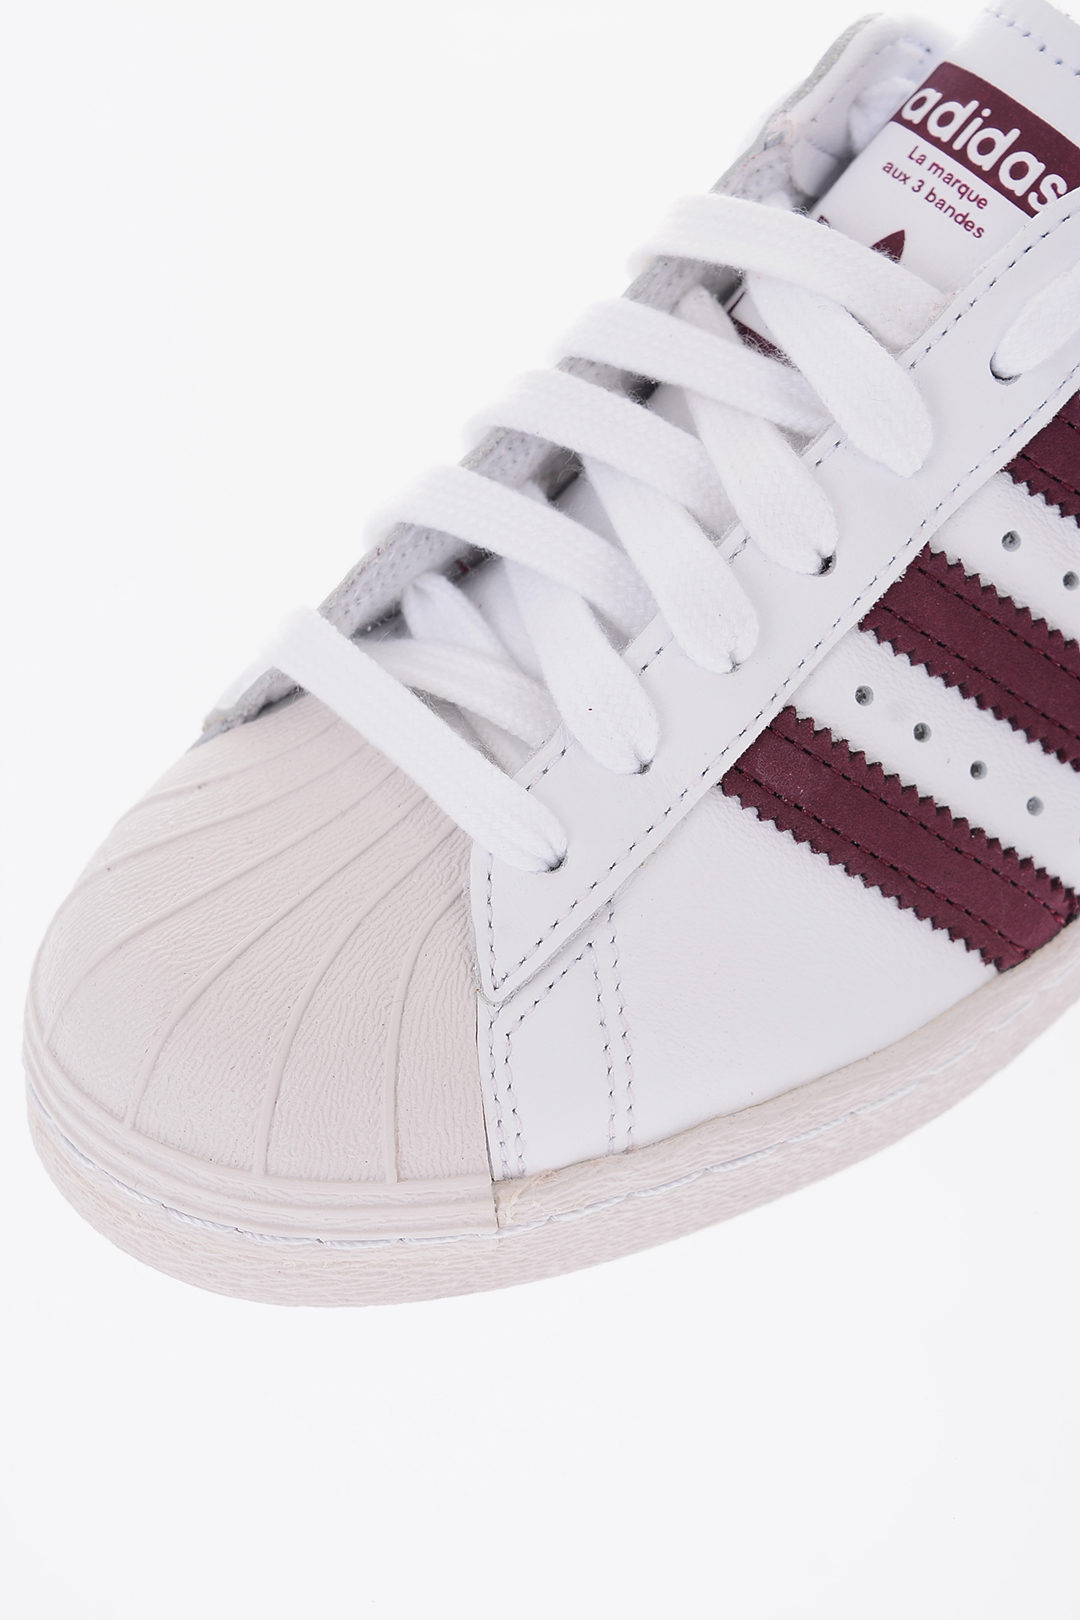 Adidas leather 80s sneakers unisex - Glamood Outlet